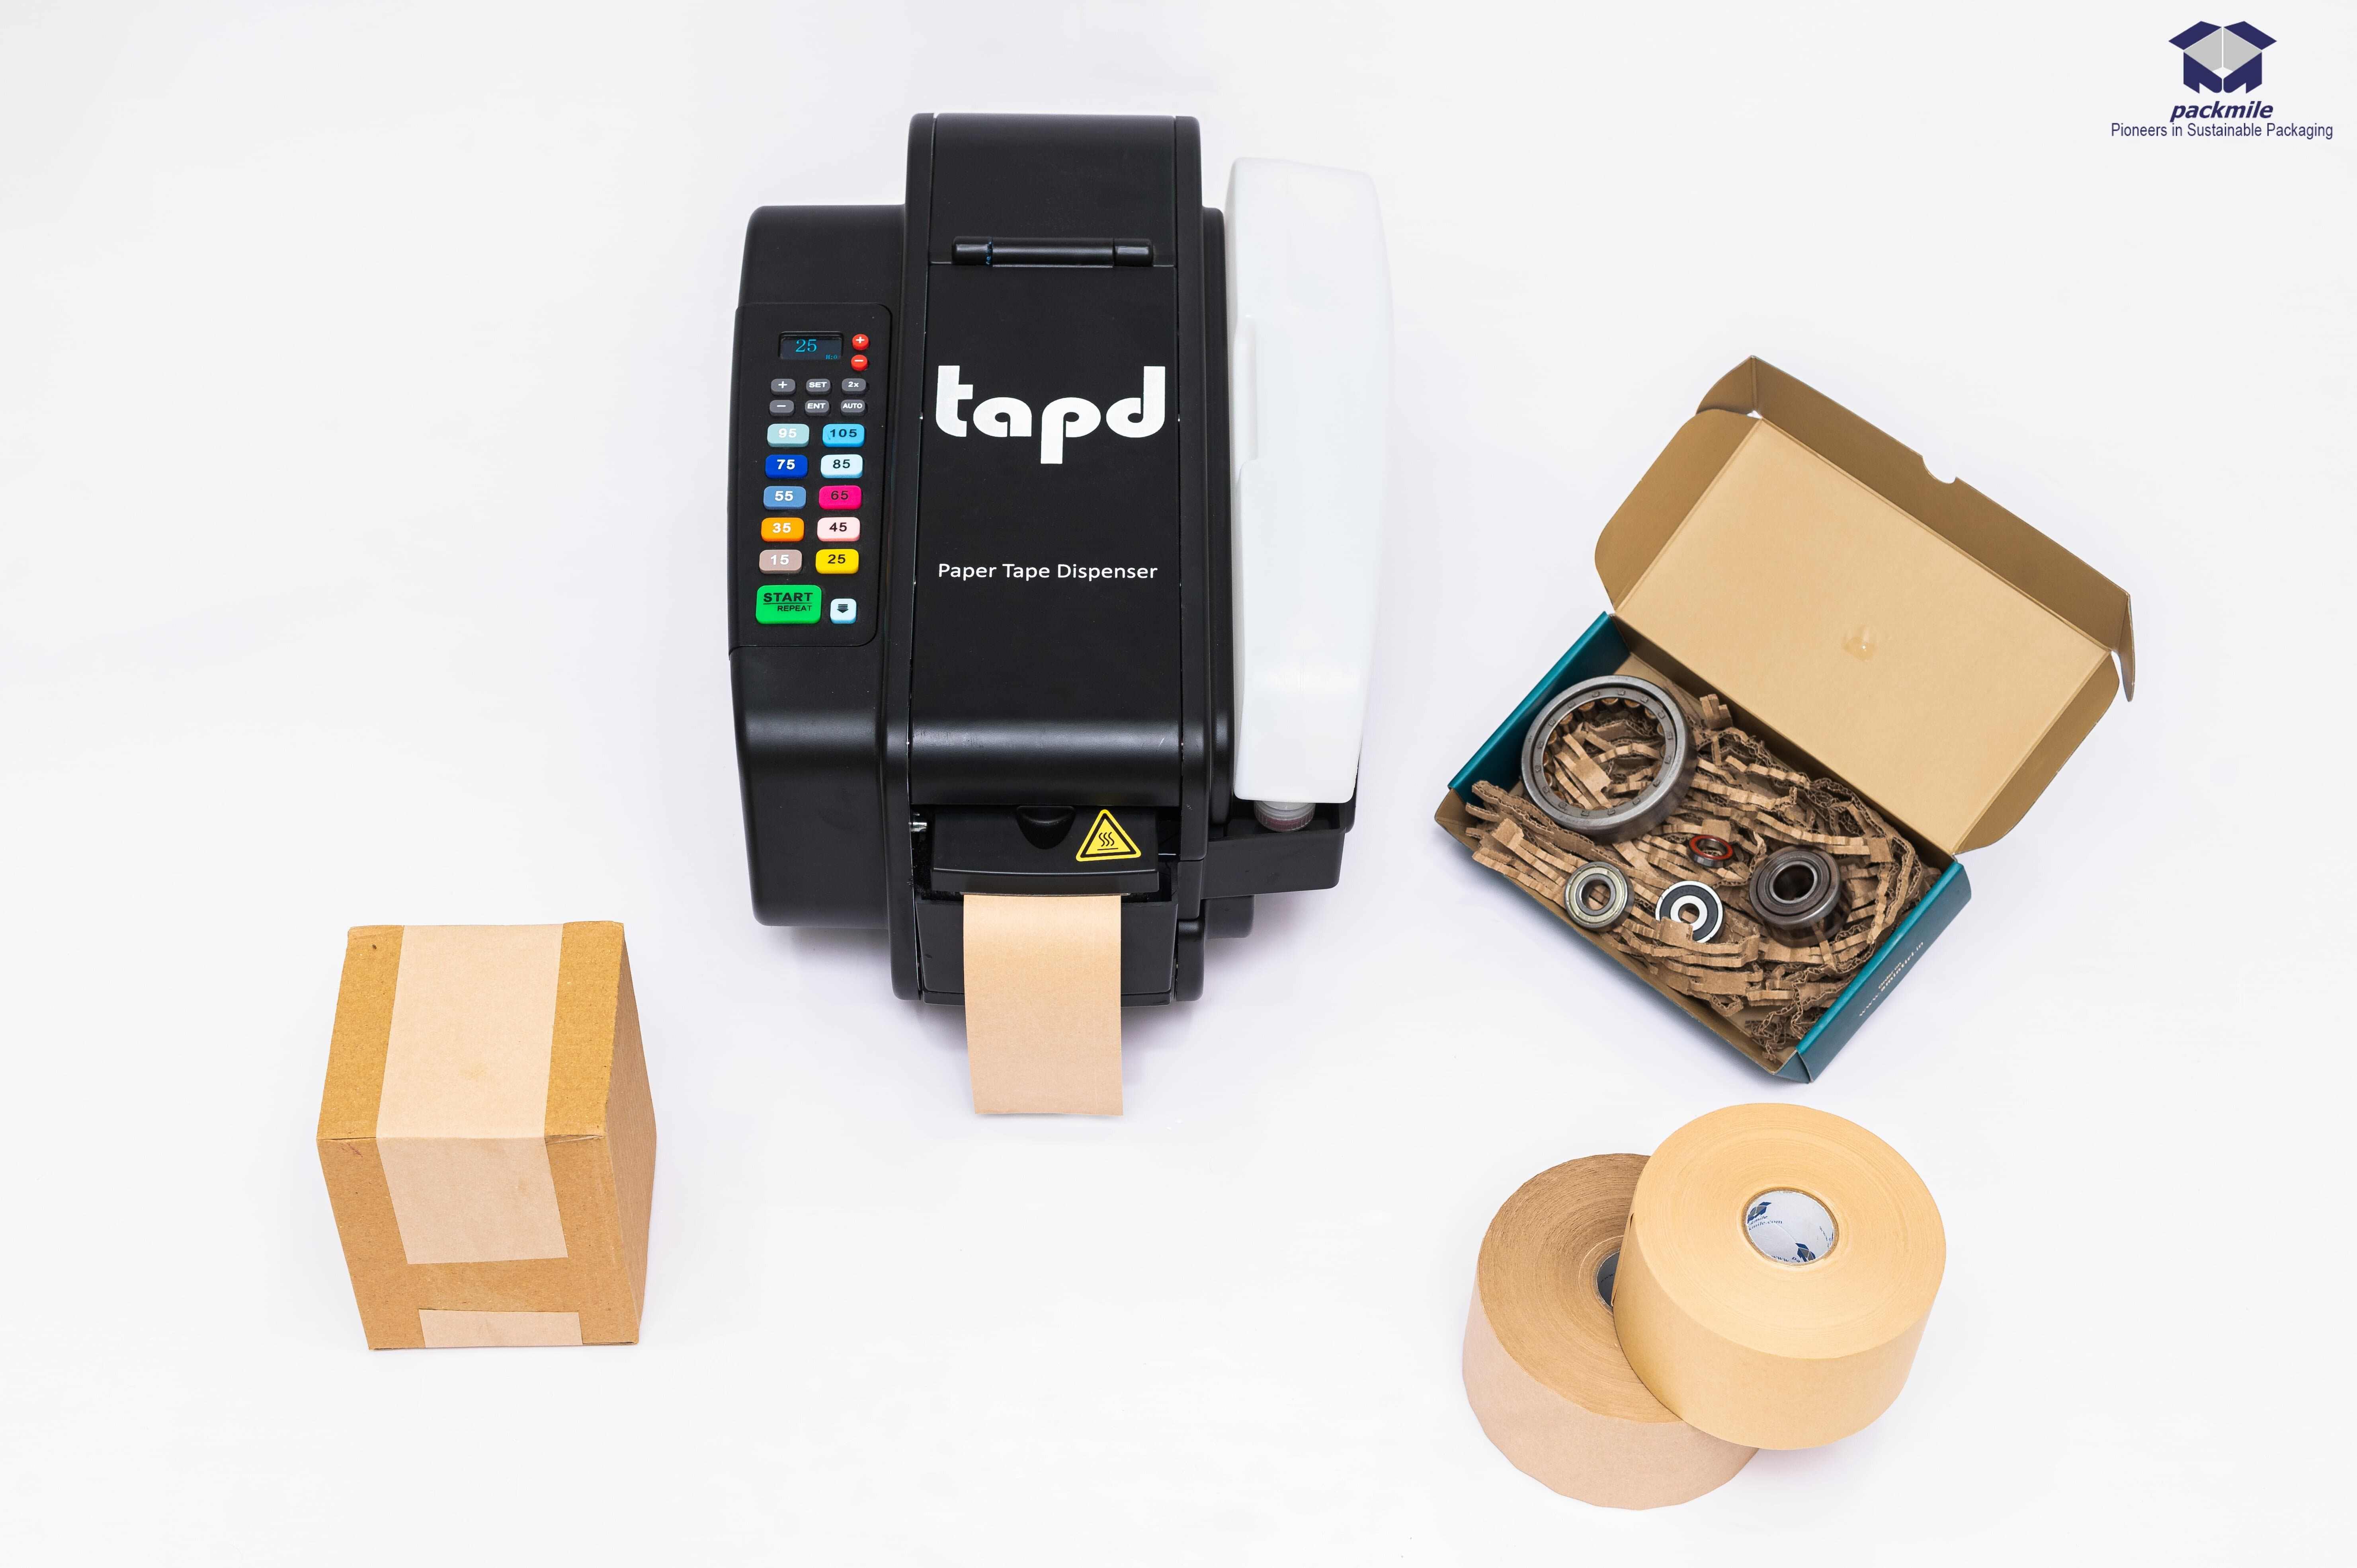 Top 5 Reasons For Switching To Paper Tape